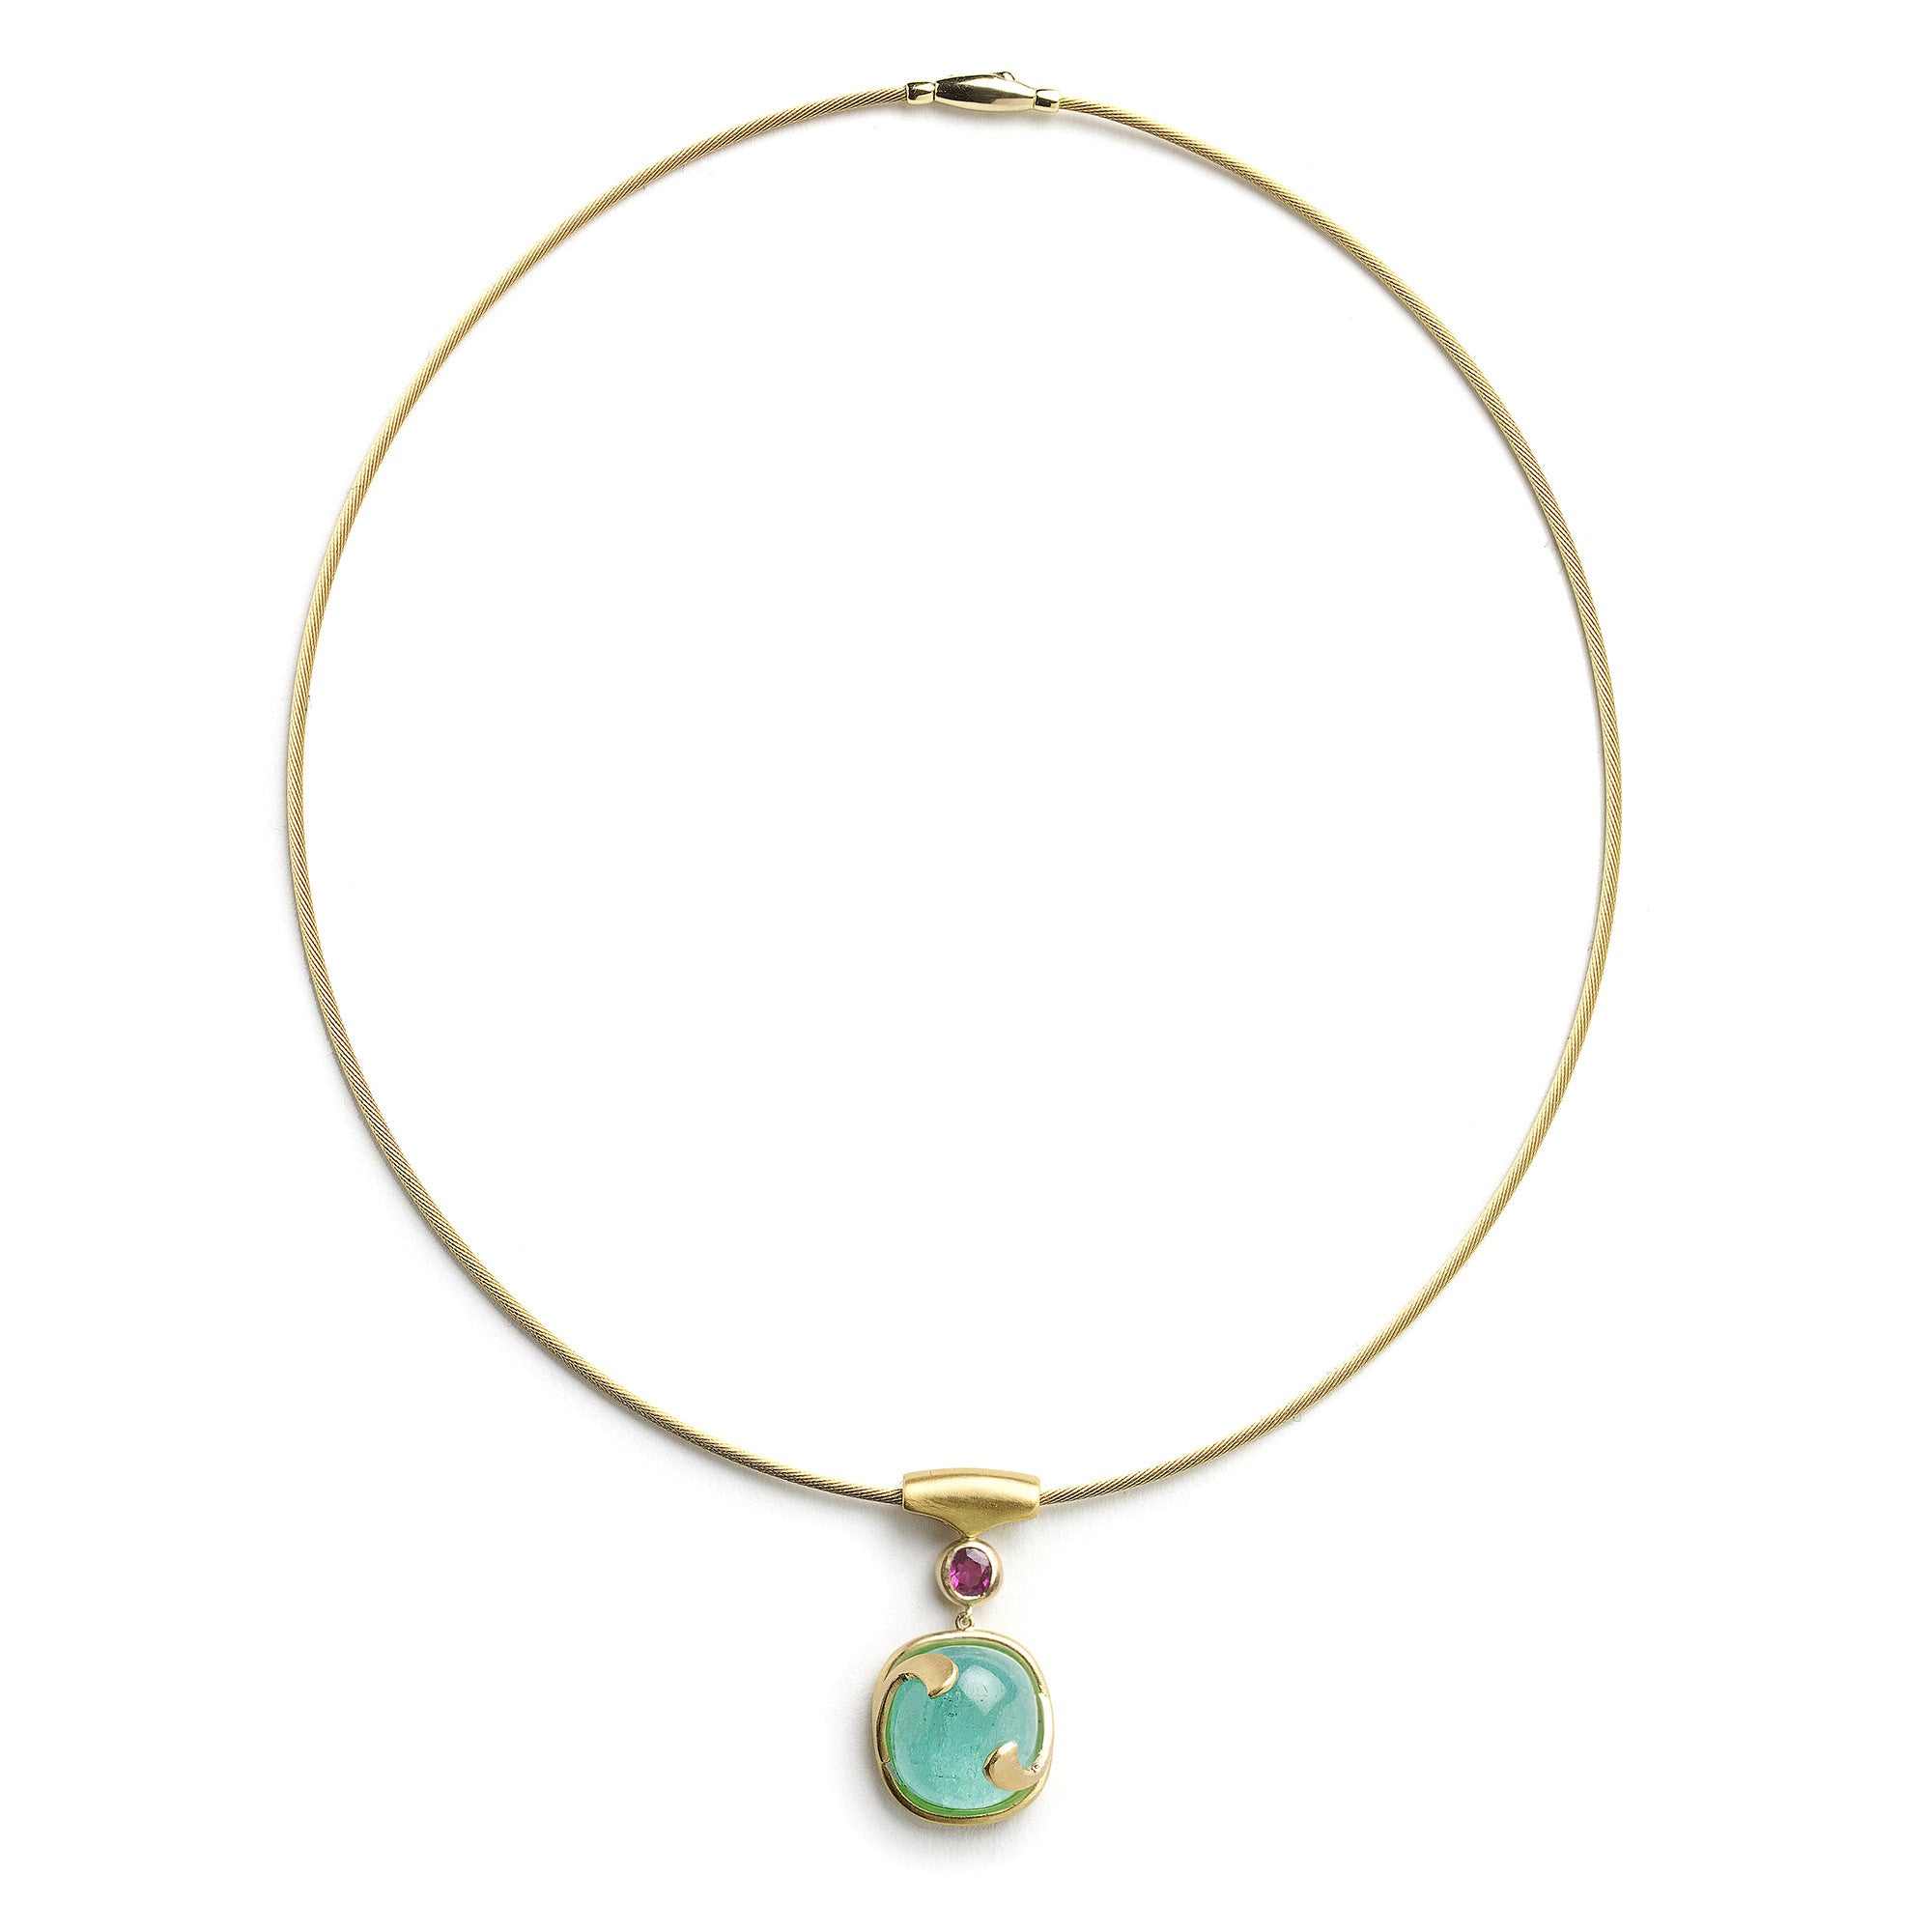 18ct yellow gold necklace with a large Paraiba tourmaline cabochon and facetted ruby, on a white background